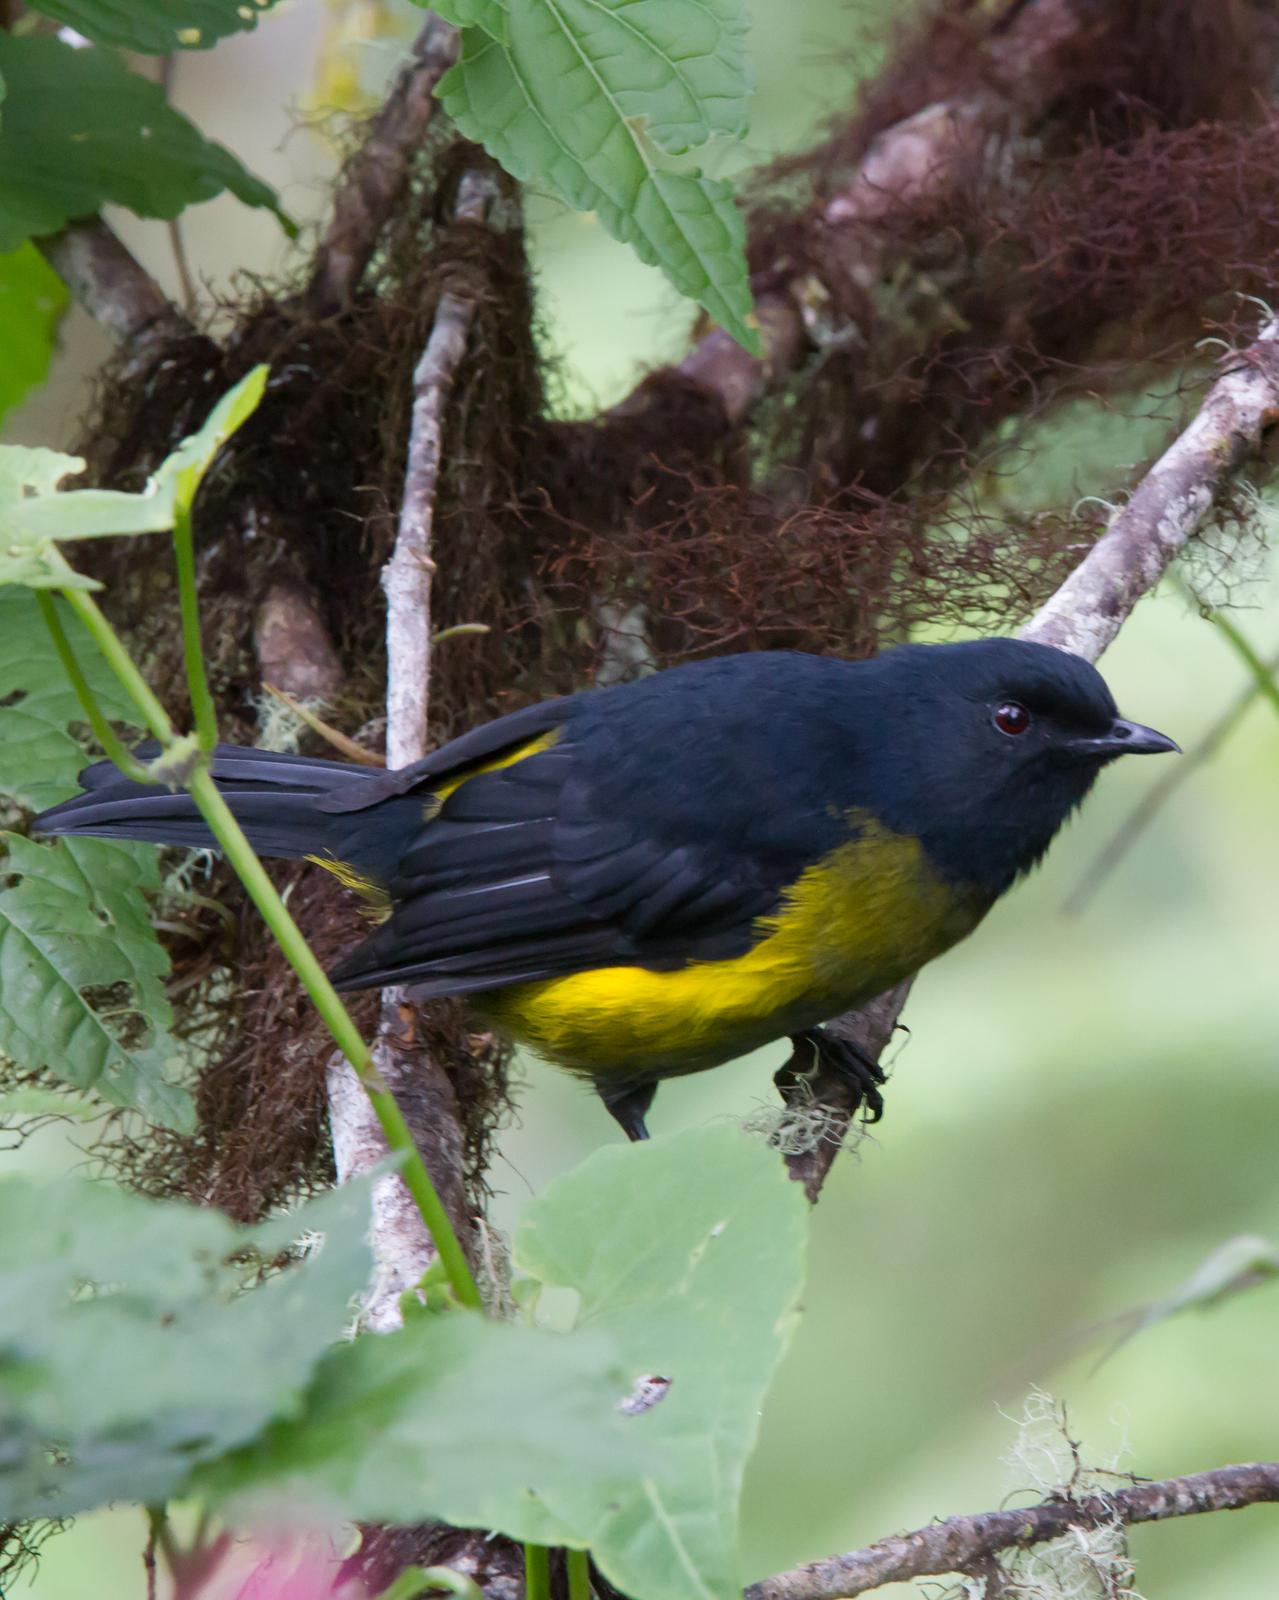 Black-and-yellow Silky-flycatcher Photo by Kevin Berkoff